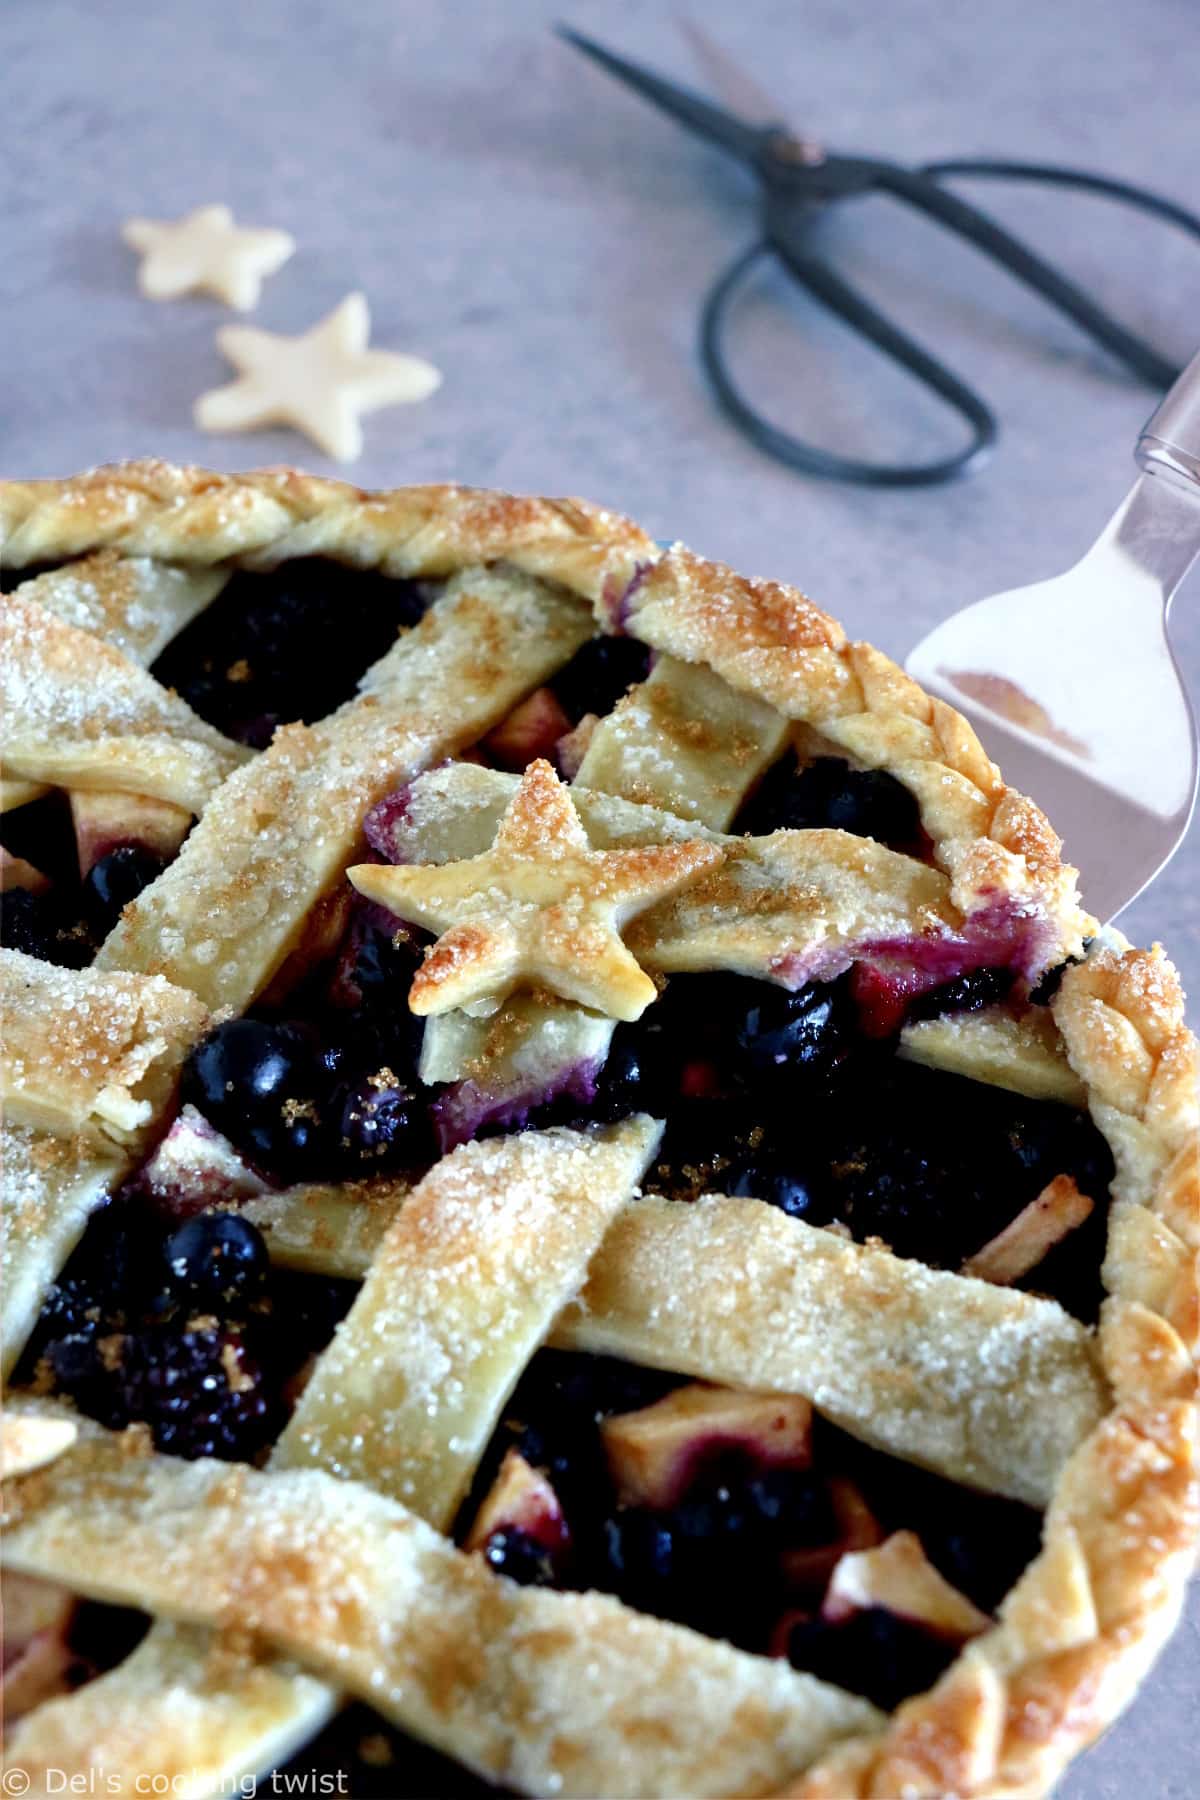 This beautiful Blackberry Apple Pie is the perfect combination of summer and fall flavors reunited together in a pie.